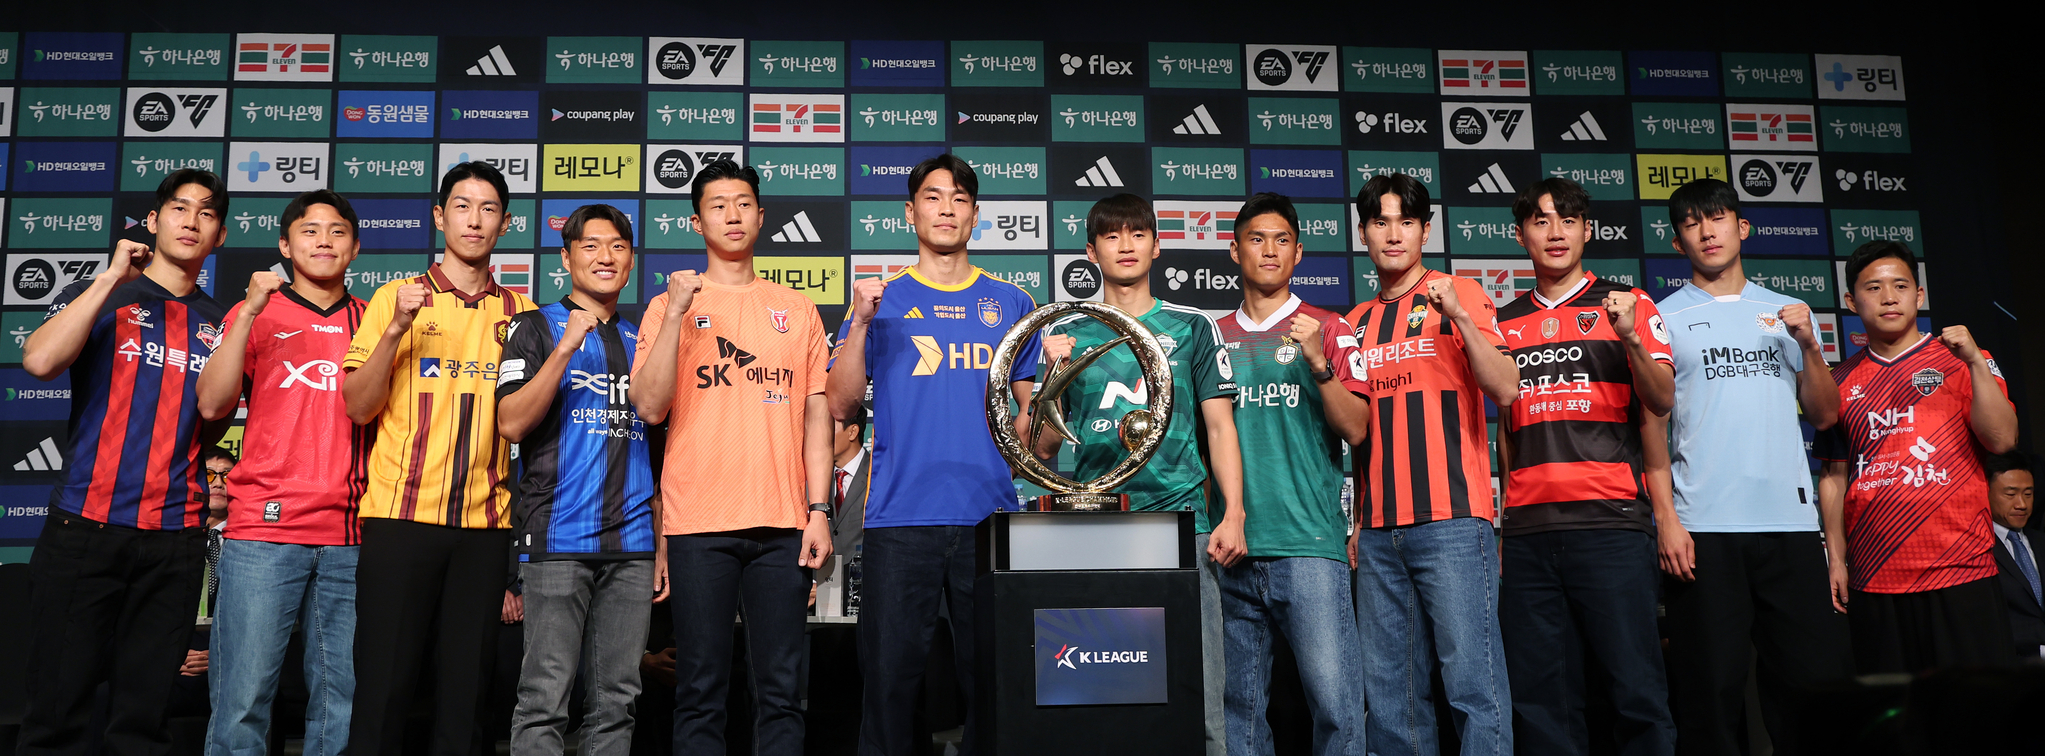 From left: Suwon FC defender Lee Yong, FC Seoul forward Cho Young-wook, Gwangju FC defender Ahn Young-kyu, Incheon United midfielder Lee Myung-joo, Jeju United defender Lim Chai-min, Ulsan HD defender Kim Ki-hee, Jeonbuk Hyundai Motors defender Kim Jin-su, Daejeon Hana Citizen midfielder Lee Soon-min, Gangwon FC midfielder Han Kook-young, Pohang Steelers midfielder Han Chan-hee, Daegu FC midfielder Go Jae-hyun and Gimcheon Sangmu midfielder Kim Hyeon-uk pose for a photo during a media day at The Plaza in central Seoul on Monday ahead of the start of the 2024 K League 1 season on March 1. [NEWS1] 